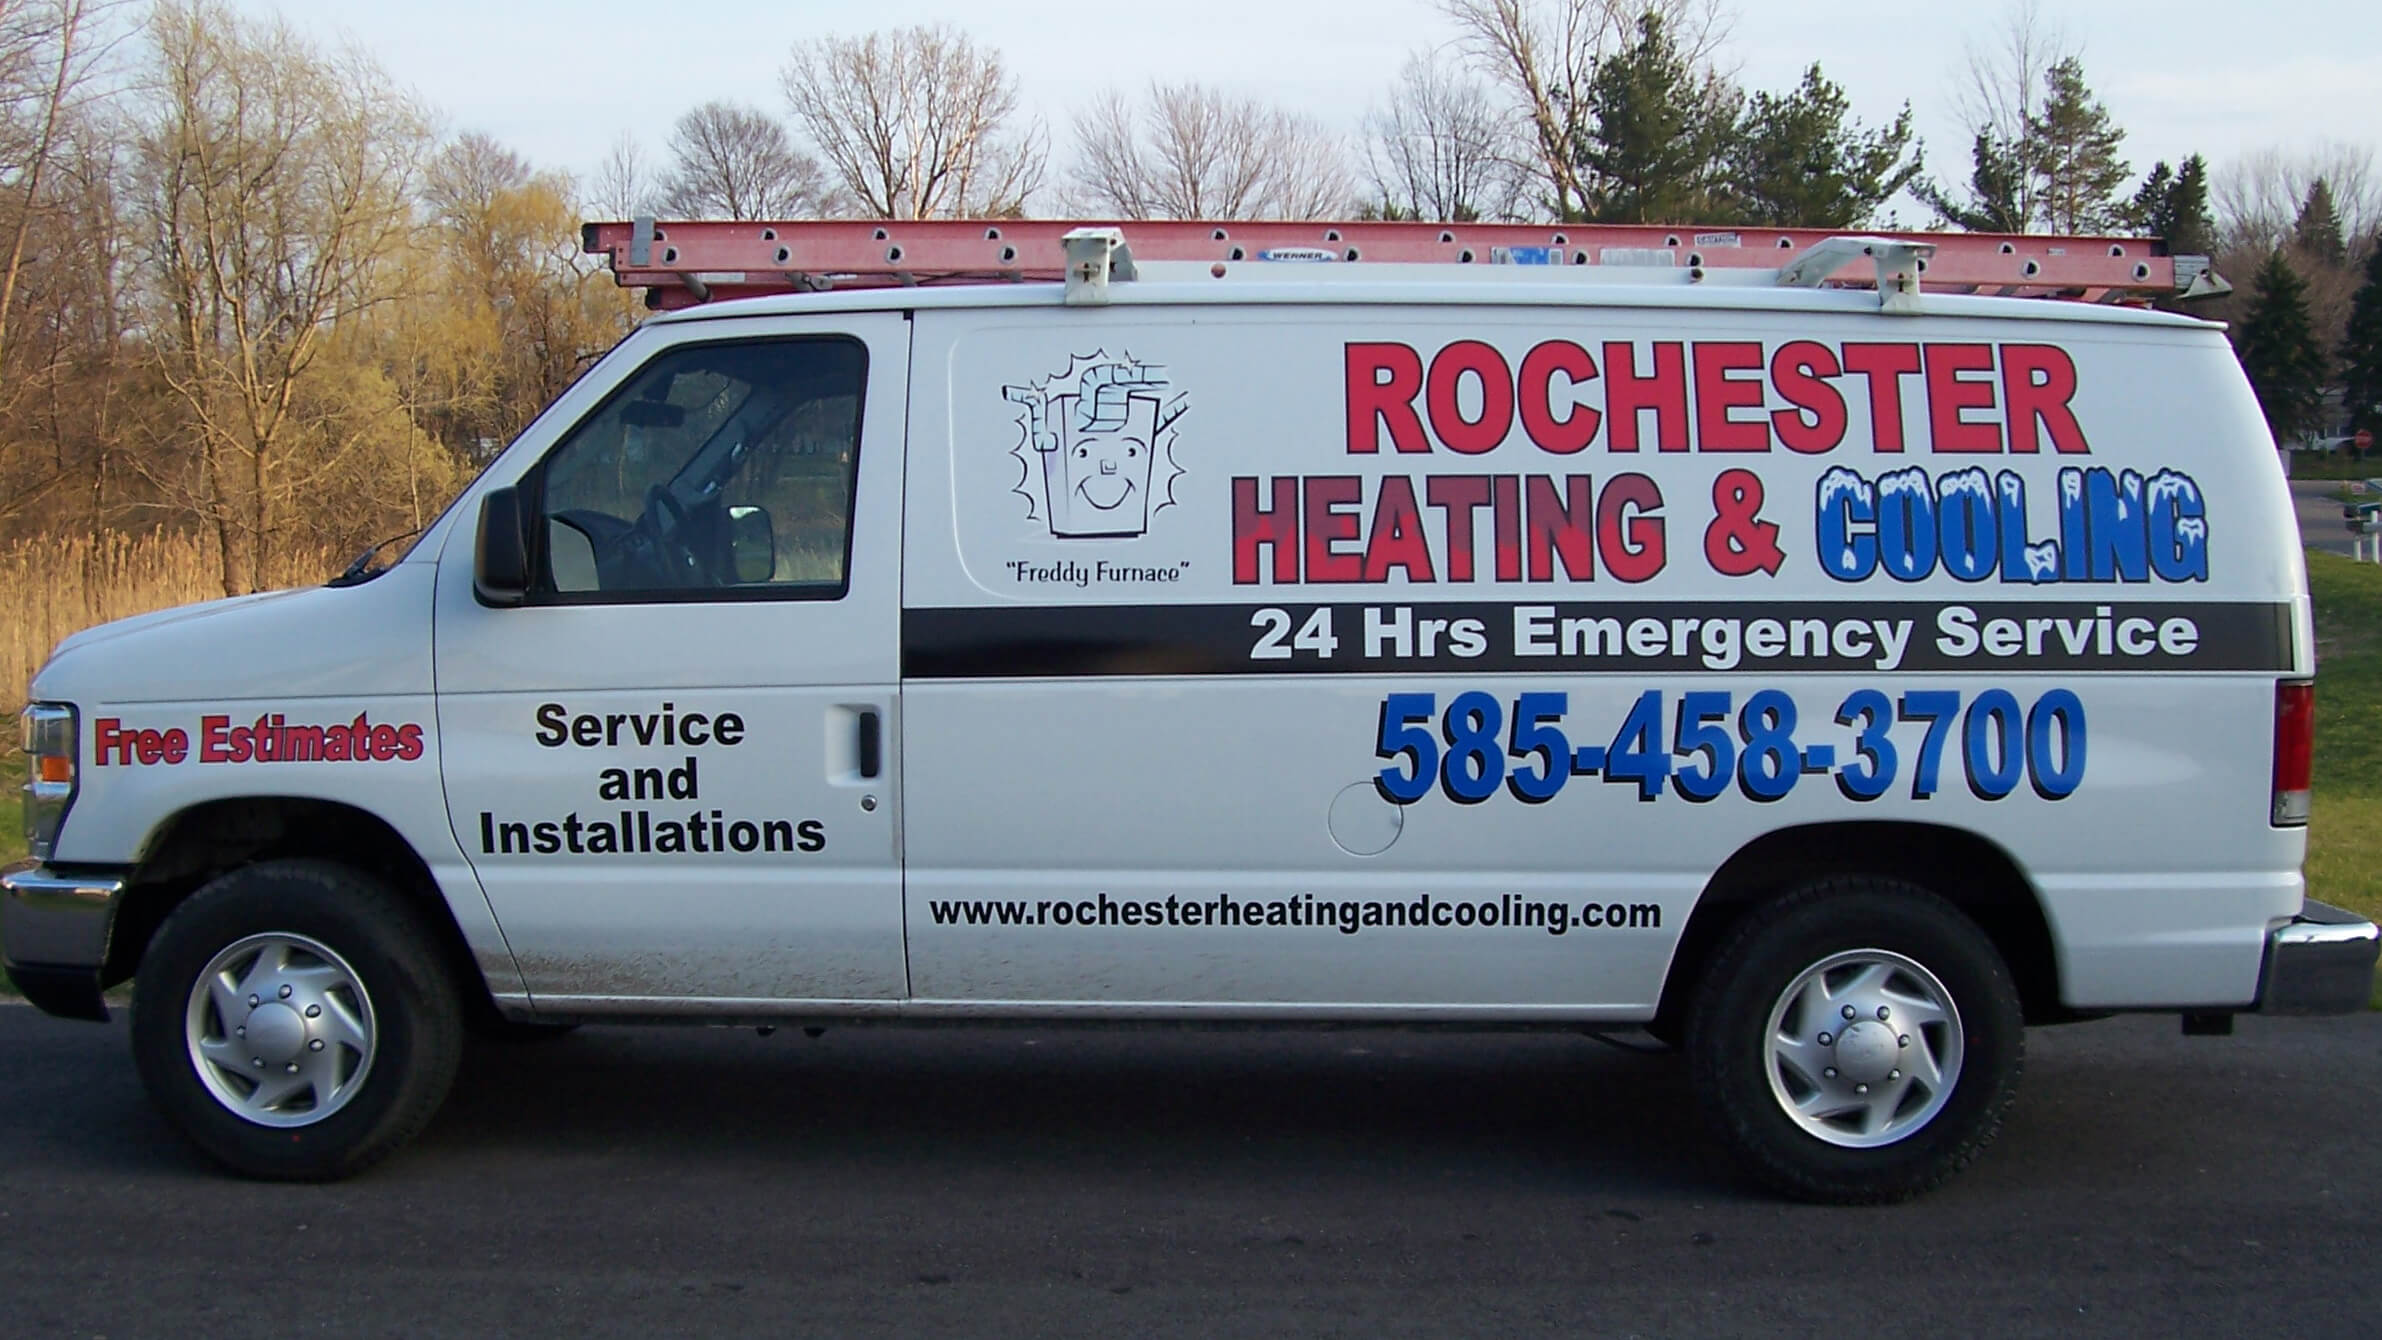 Rochester Heating and Cooling van left side vehicle graphics